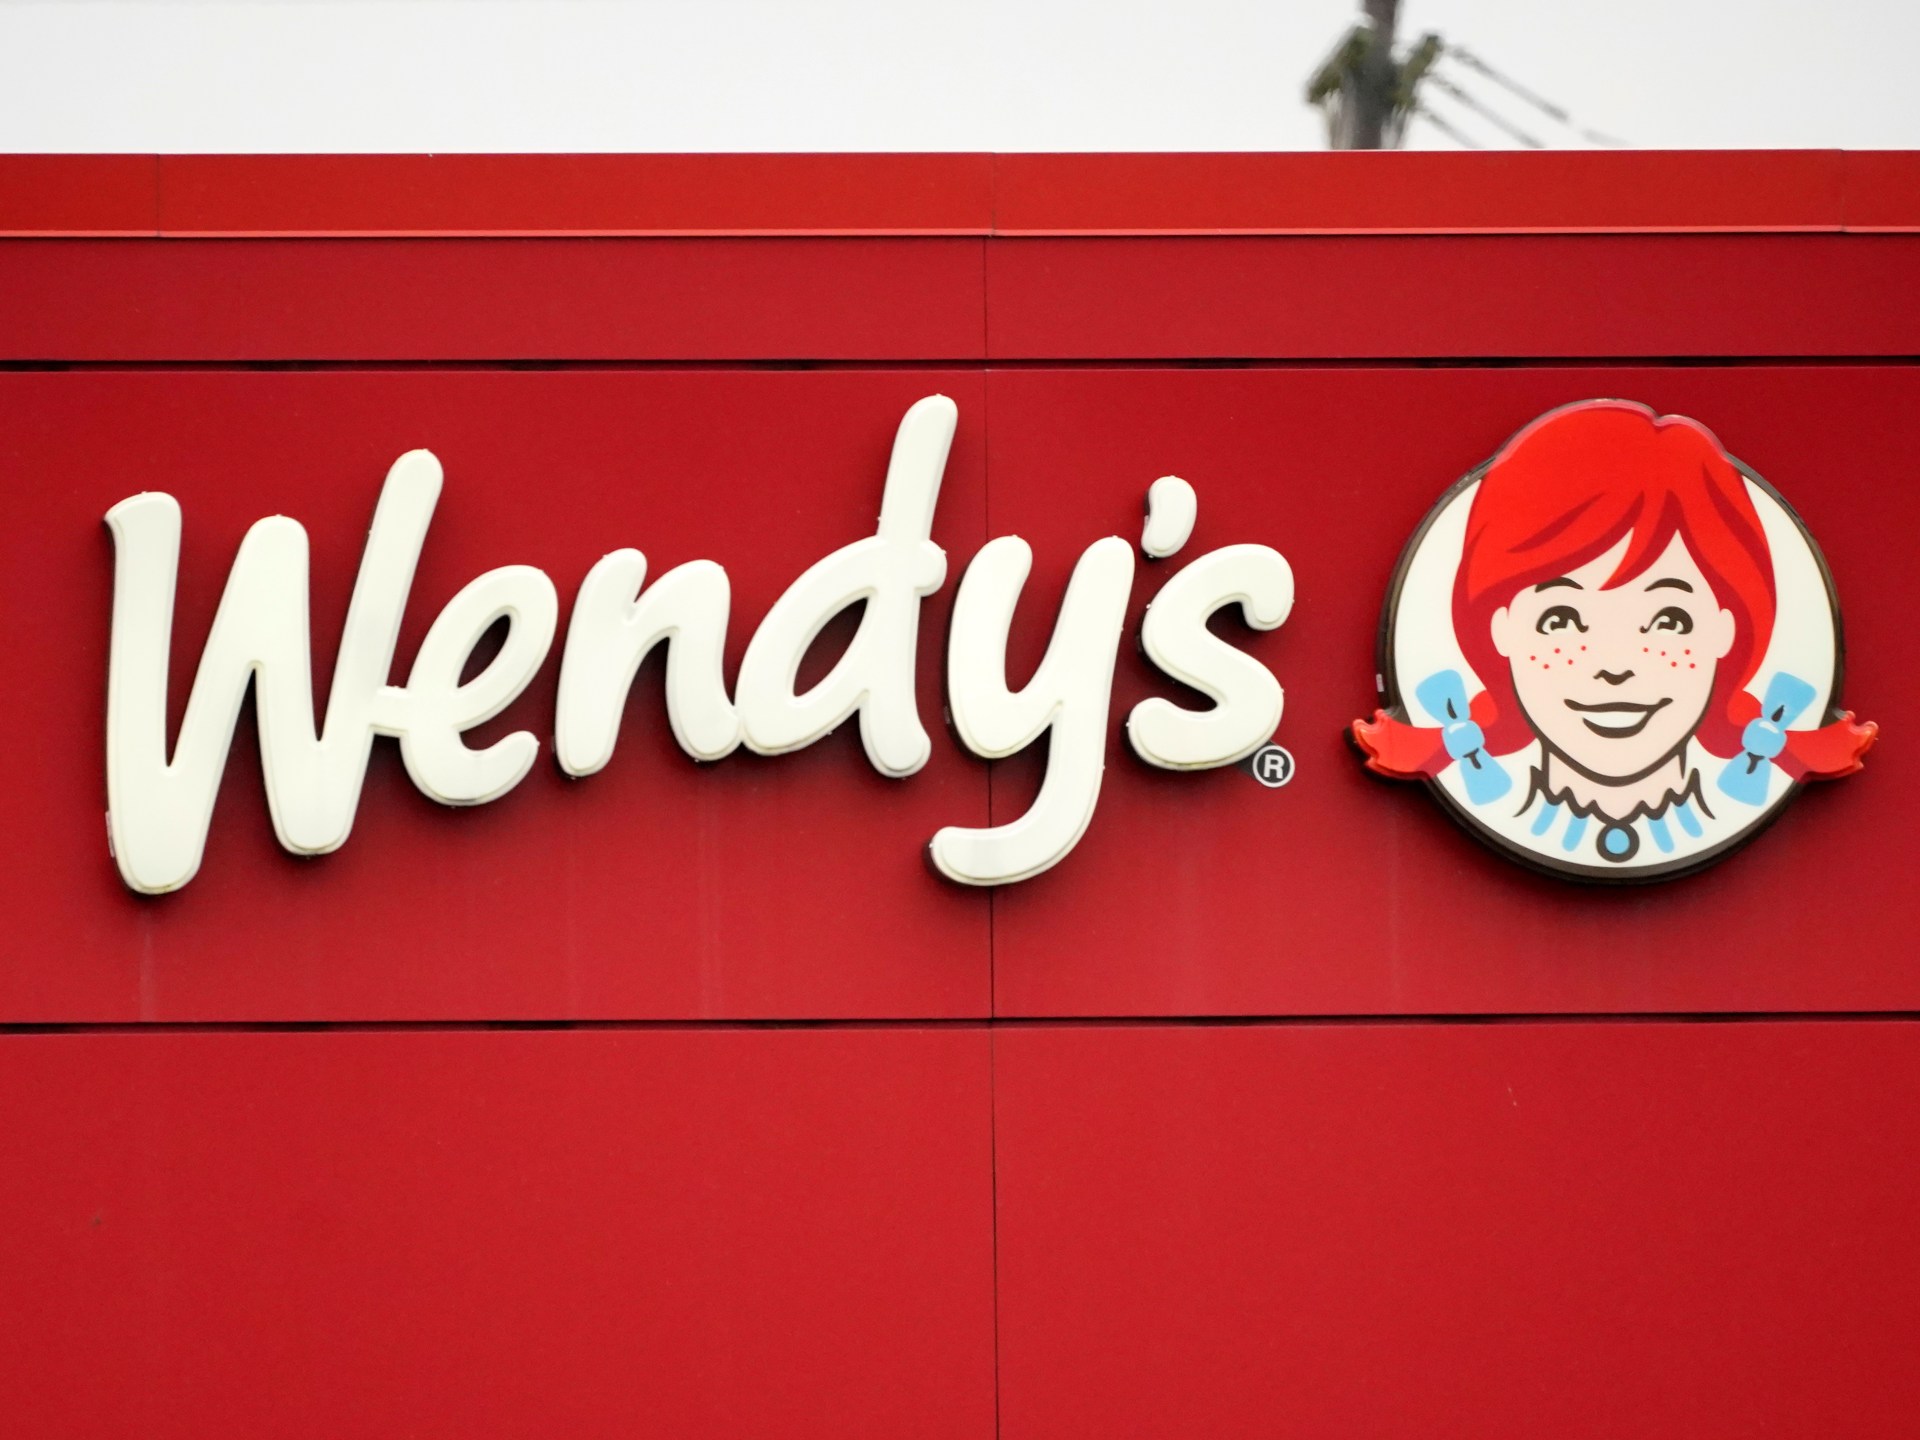 US burger chain Wendy’s plans to test ‘surge pricing’ next year